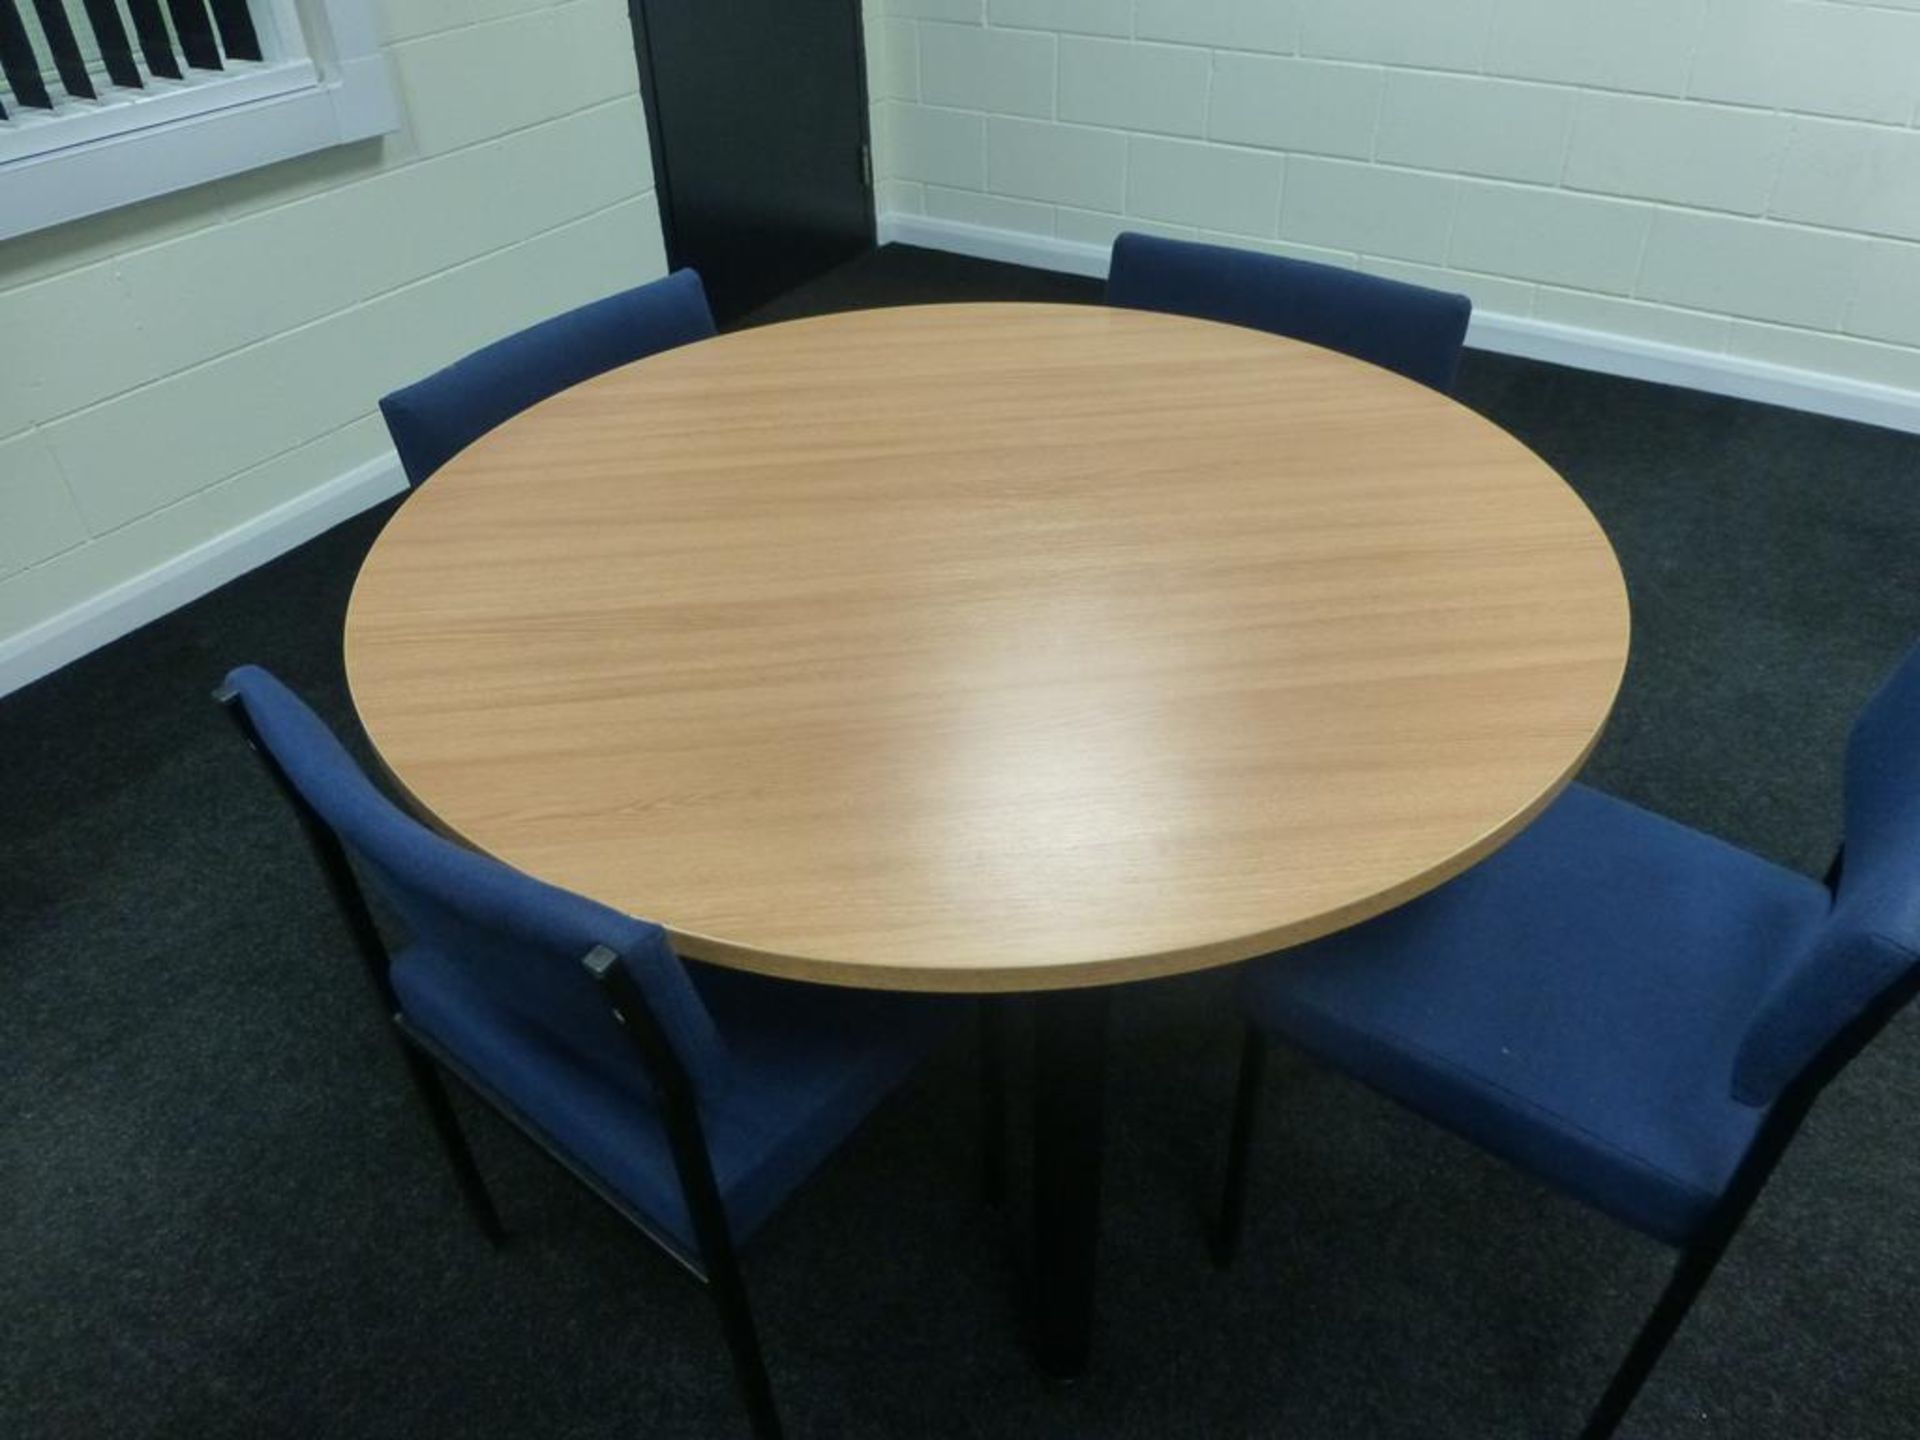 Cherry effect 1200mm x 600mm office table, cherry effect 1.2m diameter circular table and 6 blue